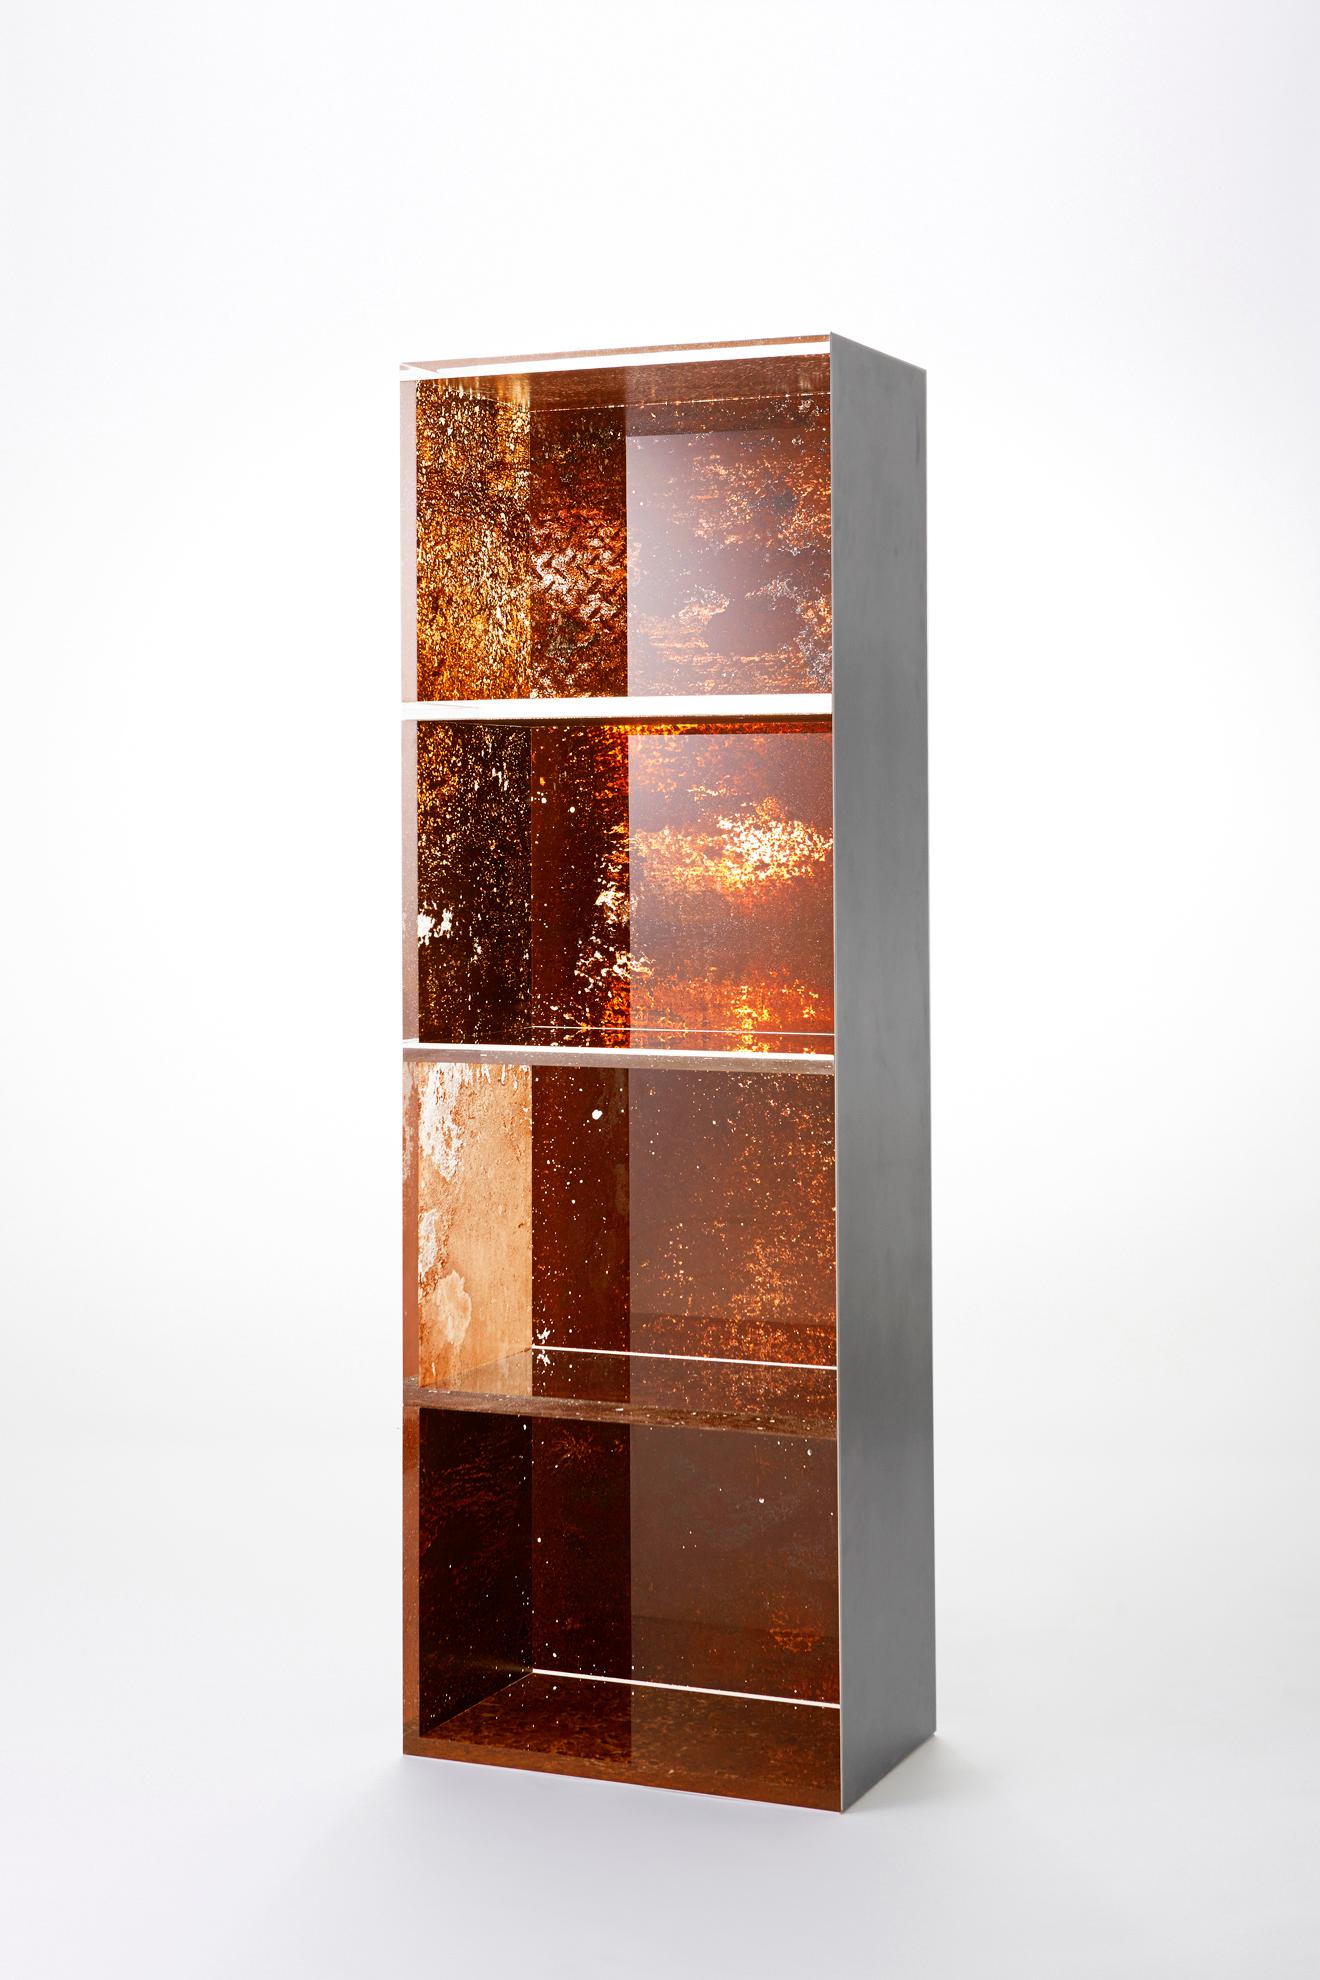 Shelf designed by Yuma Kano.
Brown colored material is acrylic. This acrylic is what rust was transformed. Artist calls it 